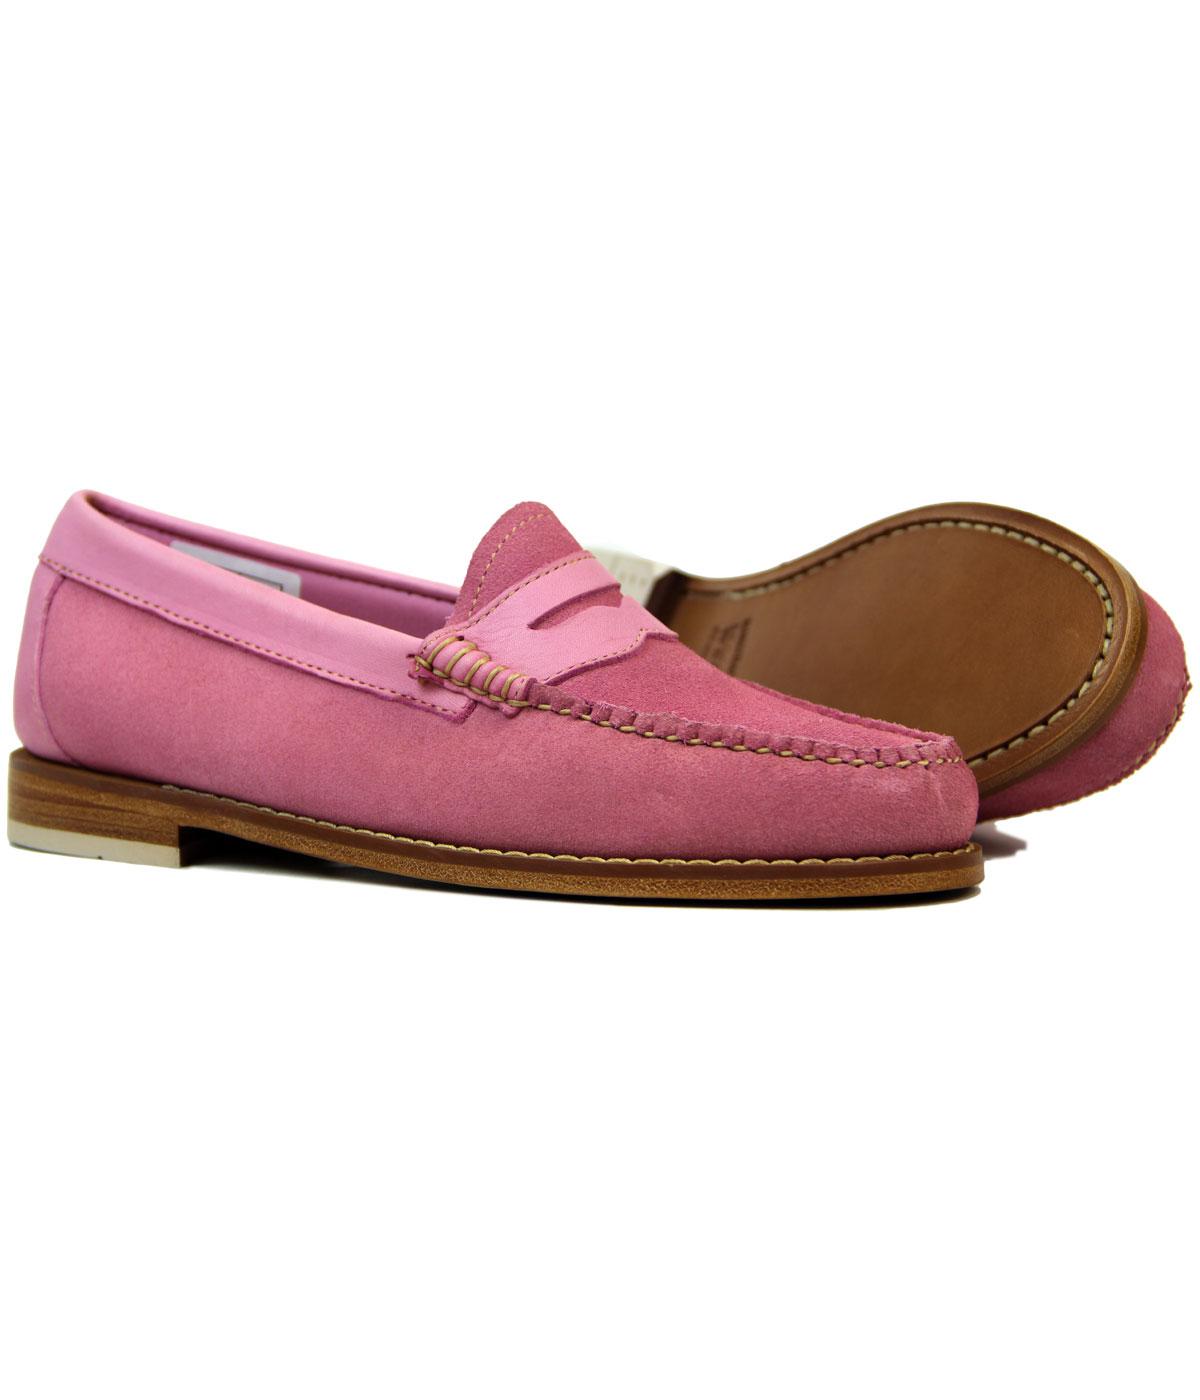 BASS WEEJUNS Womens Retro 60s Mod Velour Suede Penny Loafers Pink